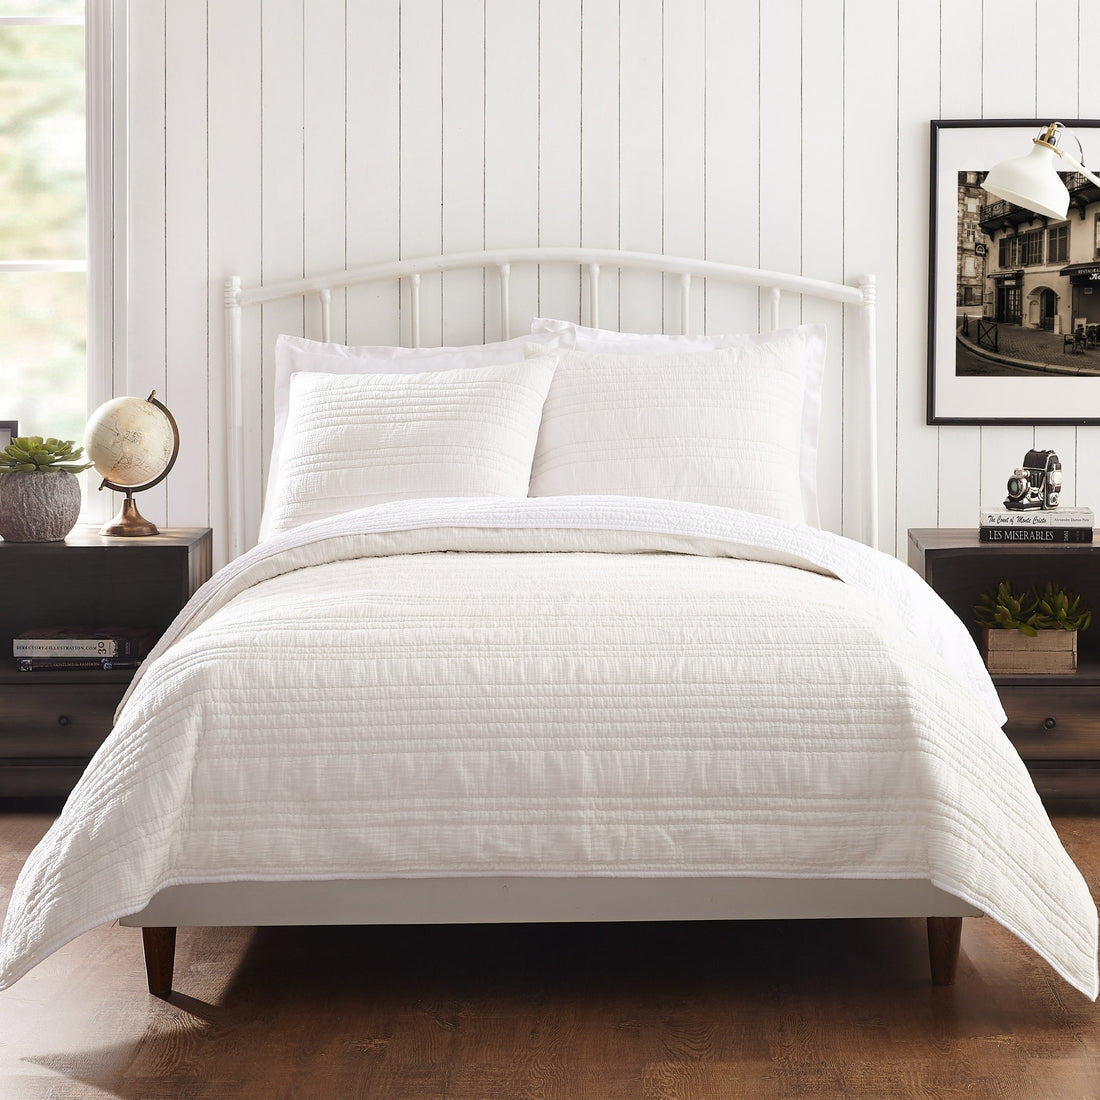 Atmosphere Quilt/Shams (White) by 1977 Dry Goods | Full/Queen